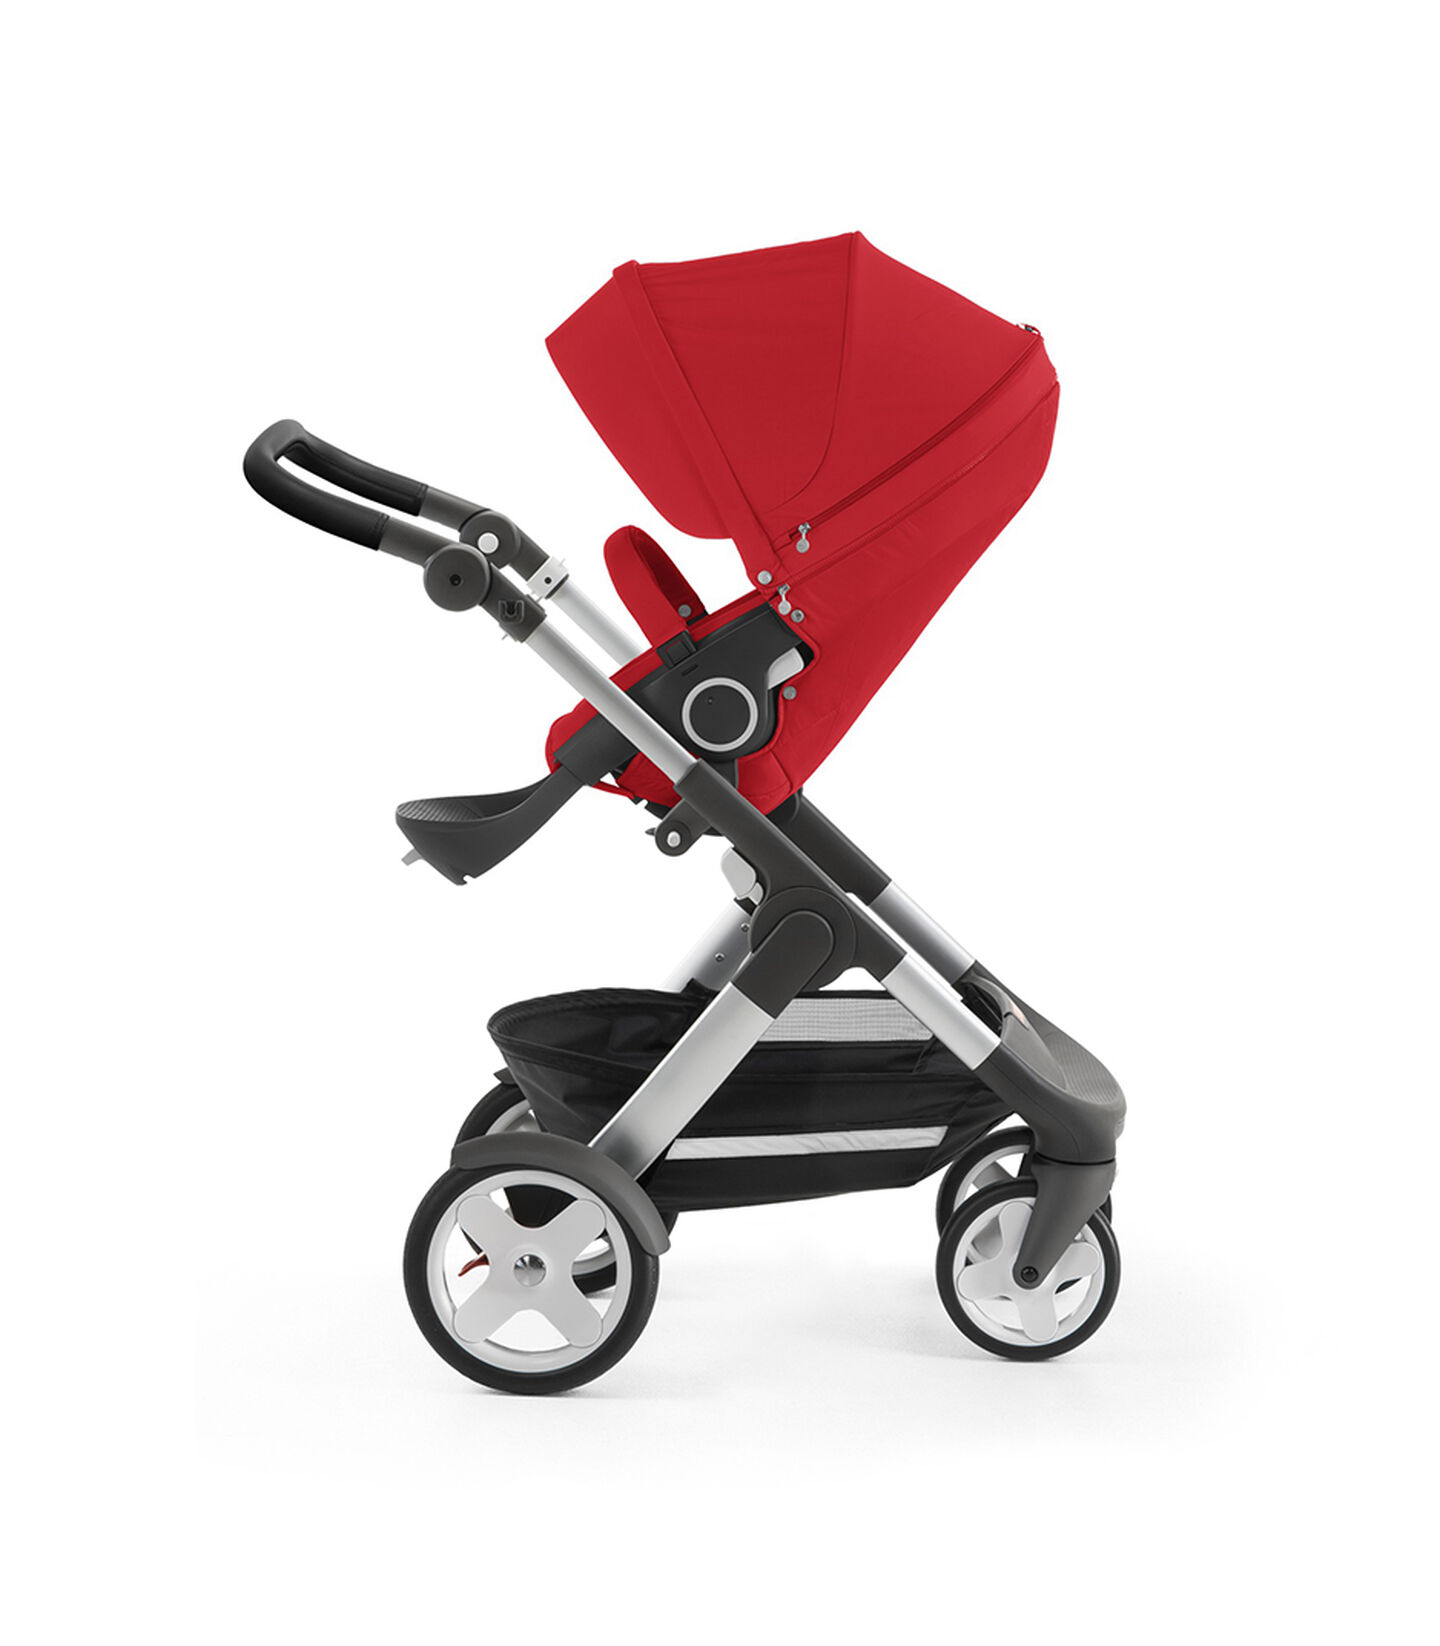 Stokke® Trailz™ with Stokke® Stroller Seat, Red. Classic Wheels. view 1